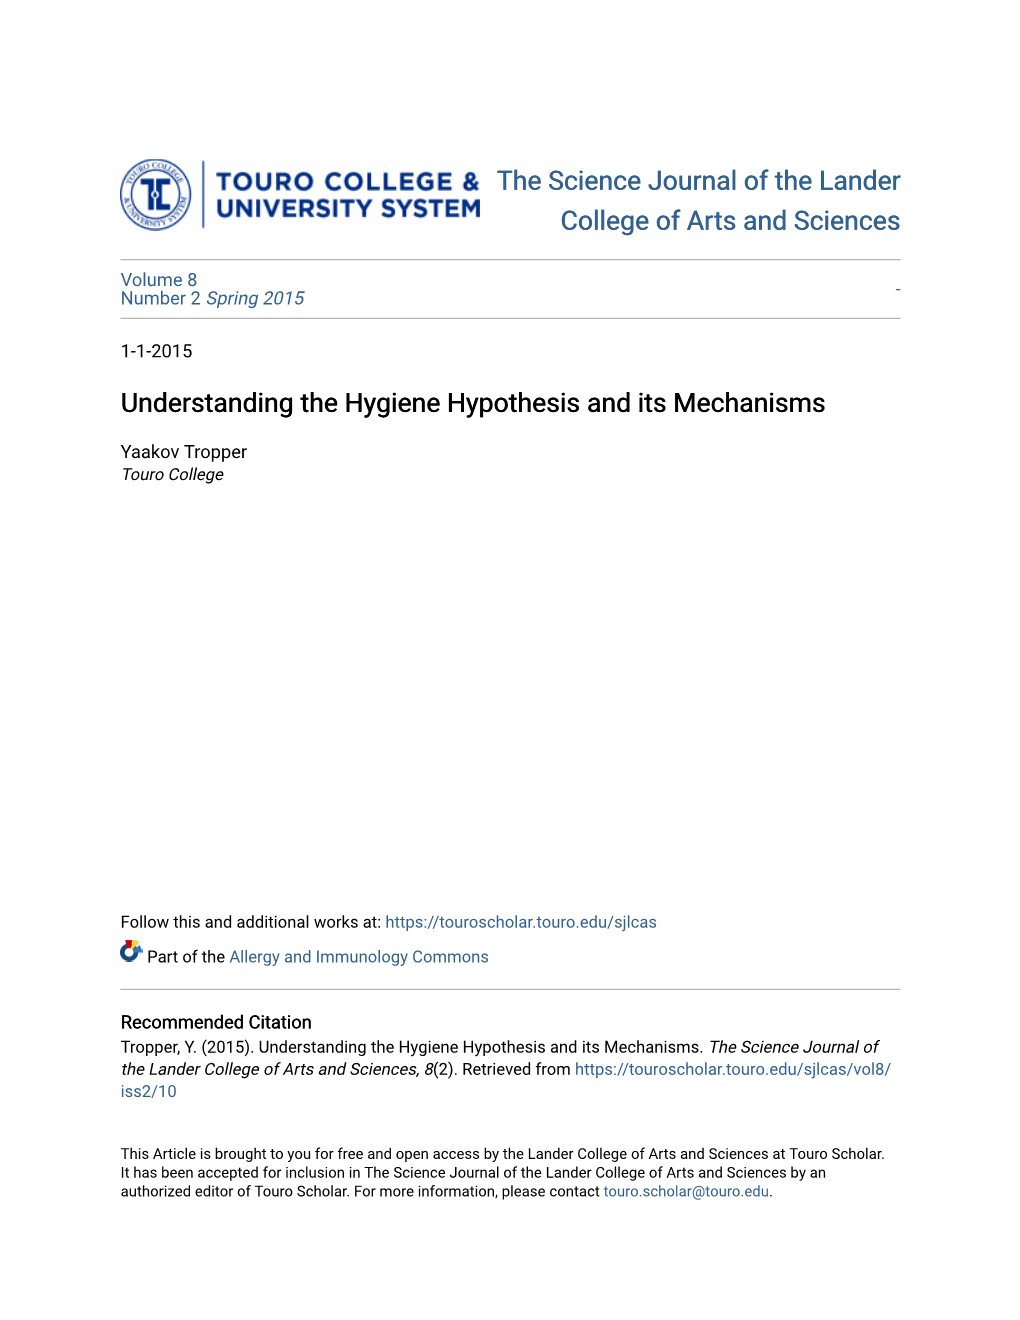 Understanding the Hygiene Hypothesis and Its Mechanisms